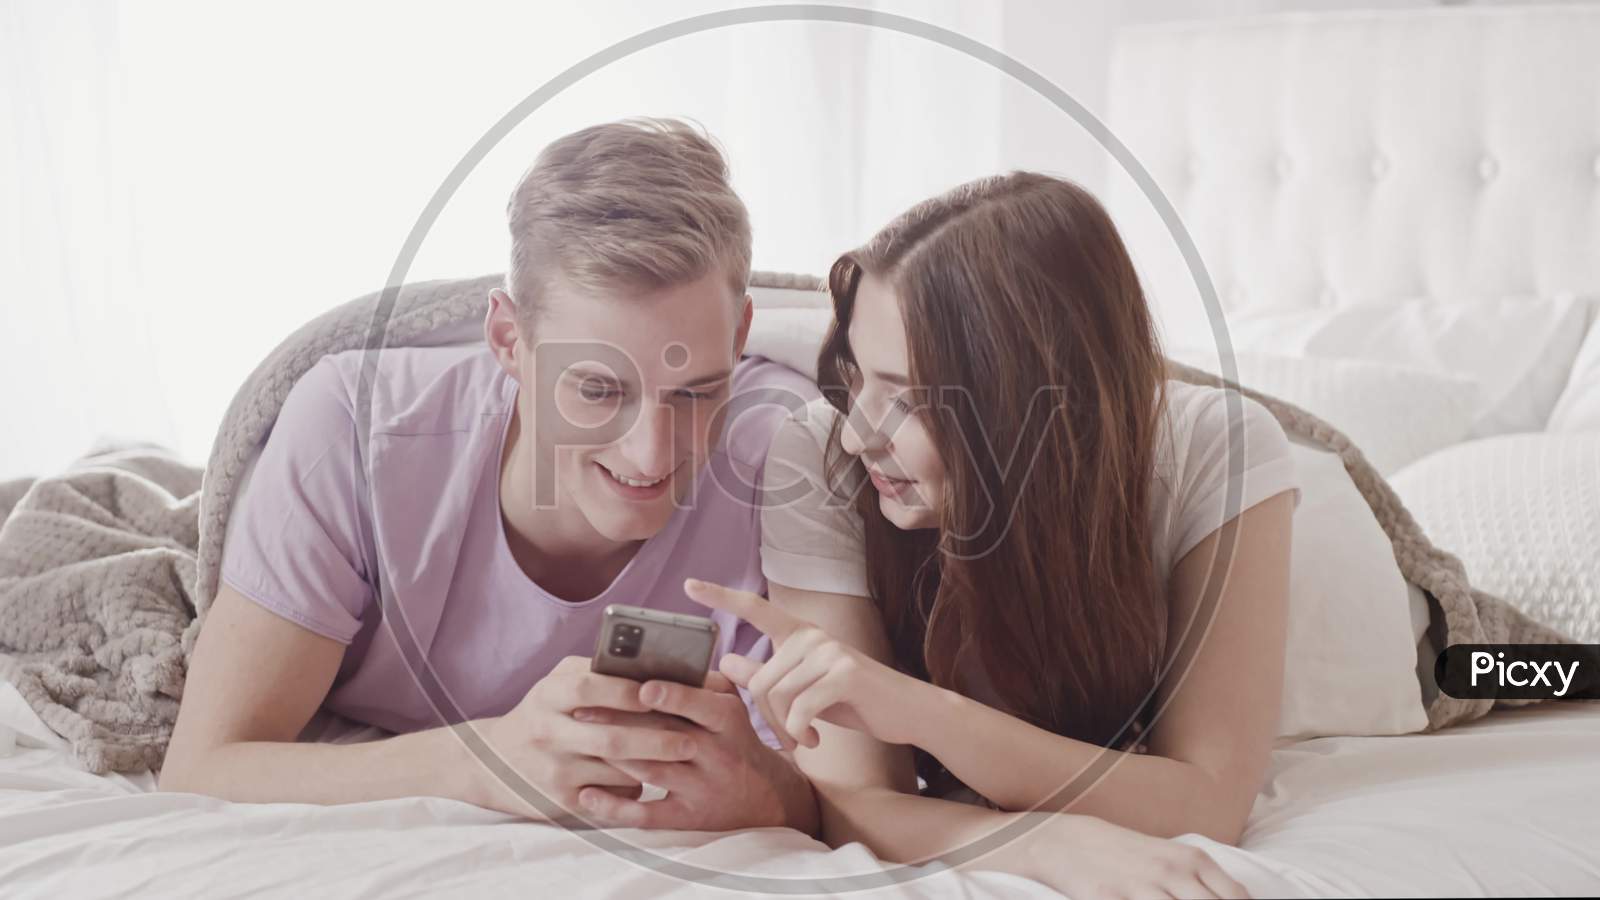 Couple Using Phone In Bed. Couple Shopping With Phone In Bed. Fun Shopping Online. Couple In Bed. Friends, Couple, Lovers Concept. Shot On Red